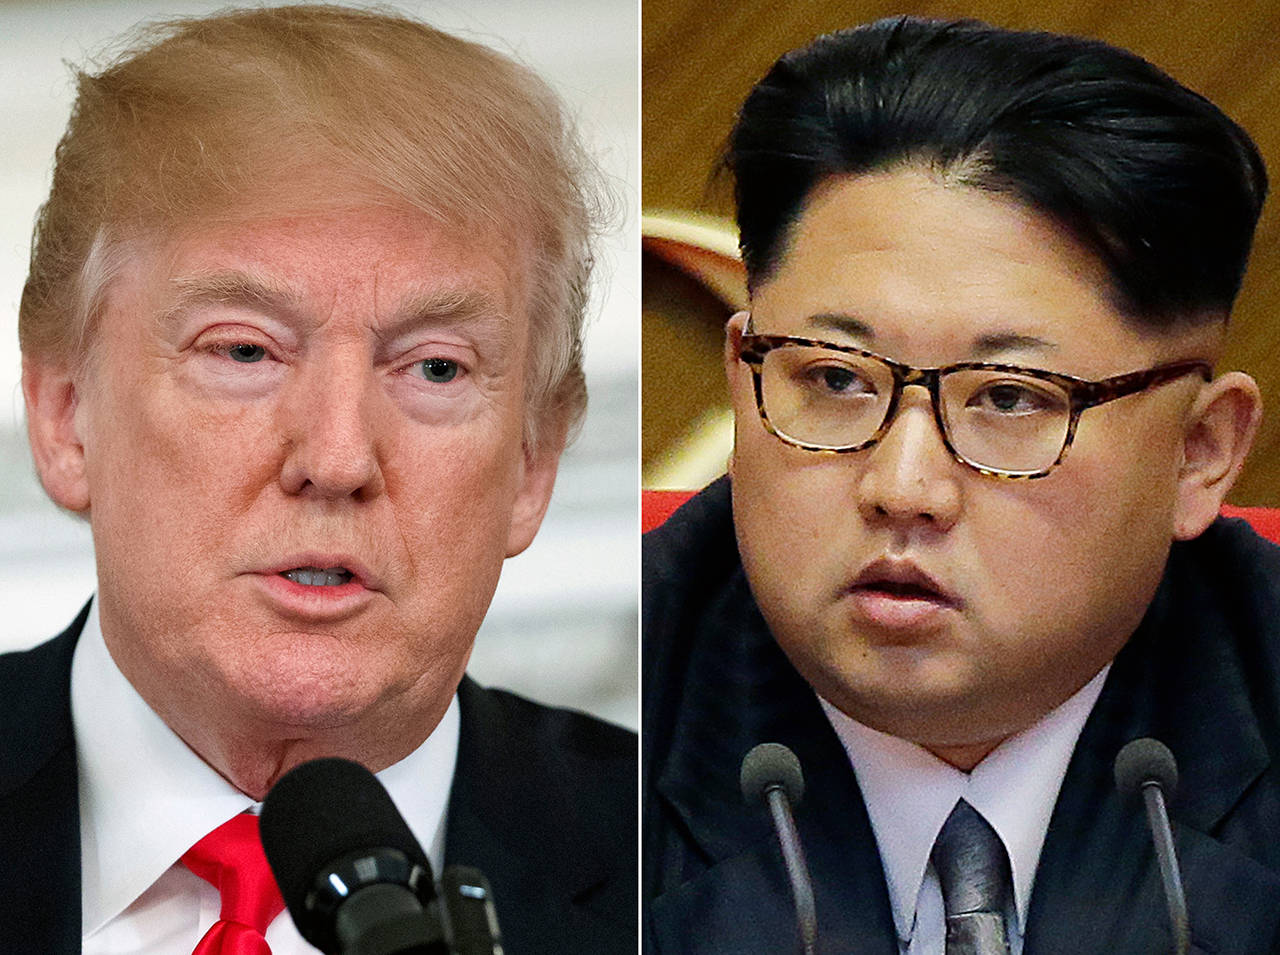 President Donald Trump (left) speaking at the White House on Feb. 26, and North Korean leader Kim Jong Un in Pyongyang in May 2016. (AP Photo/Evan Vucci, Wong Maye-E, File)